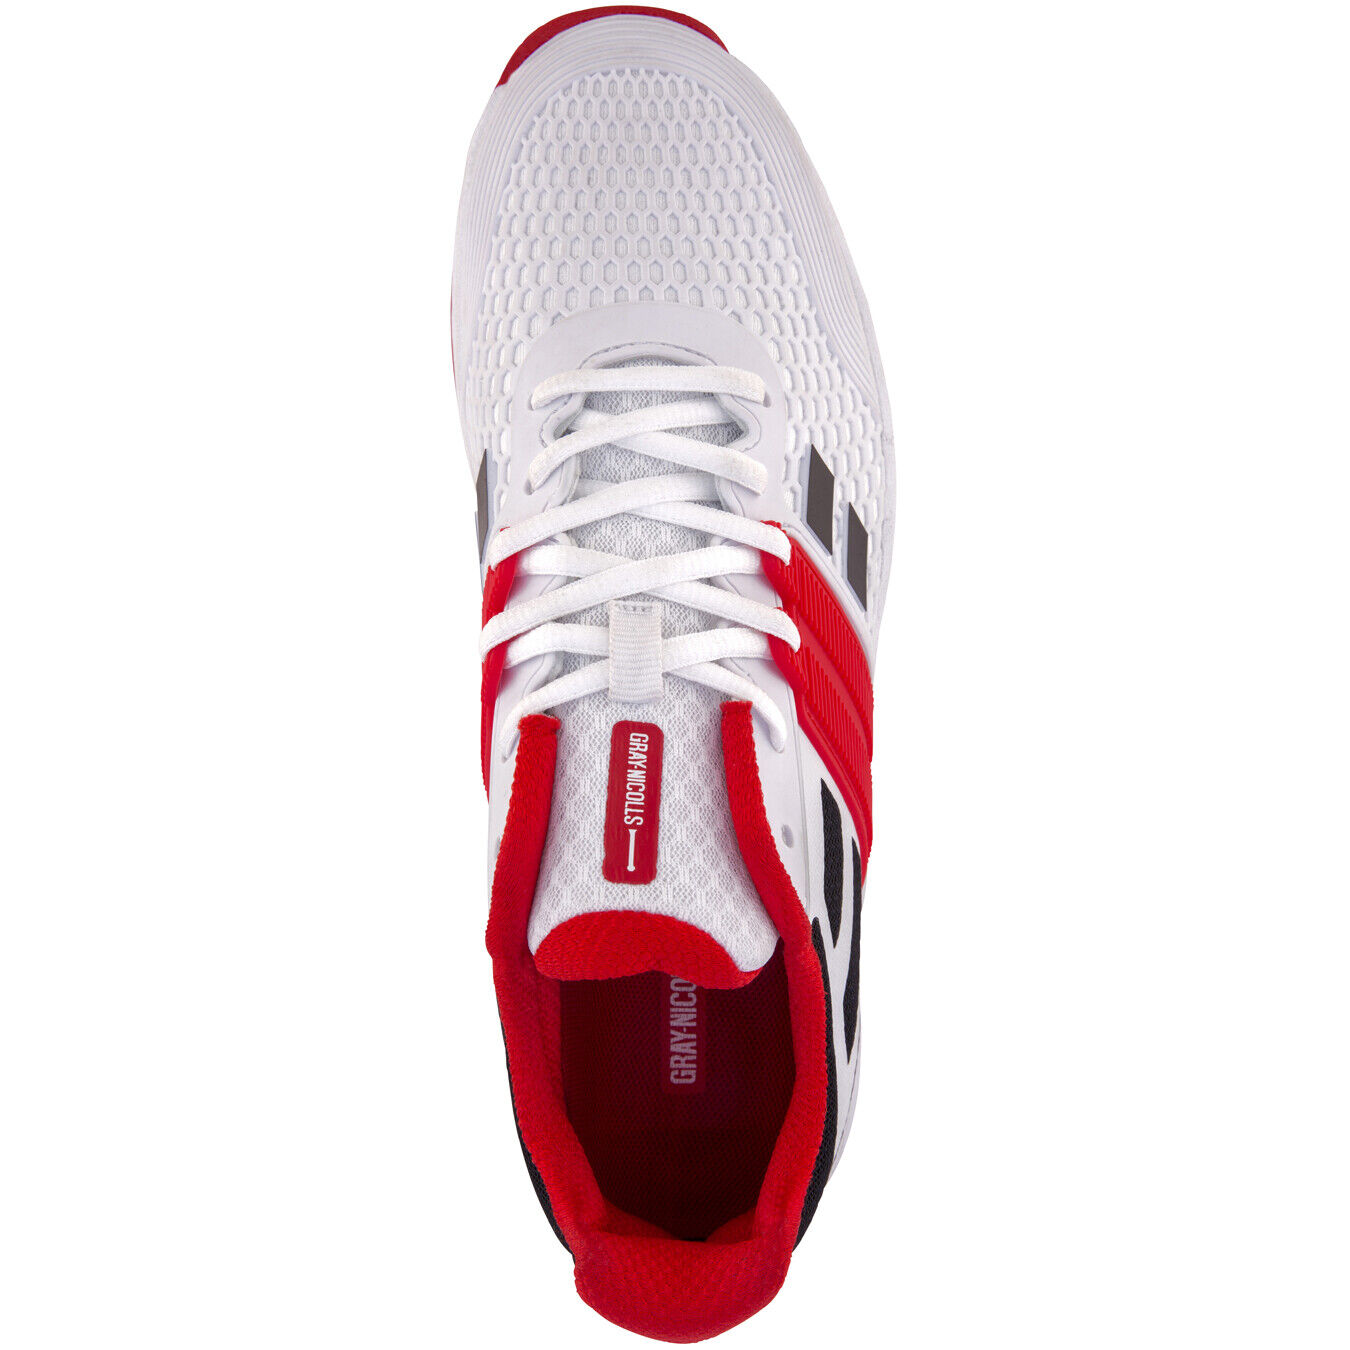 Gray Nicolls Cage 2.0 Spike Cricket Shoes